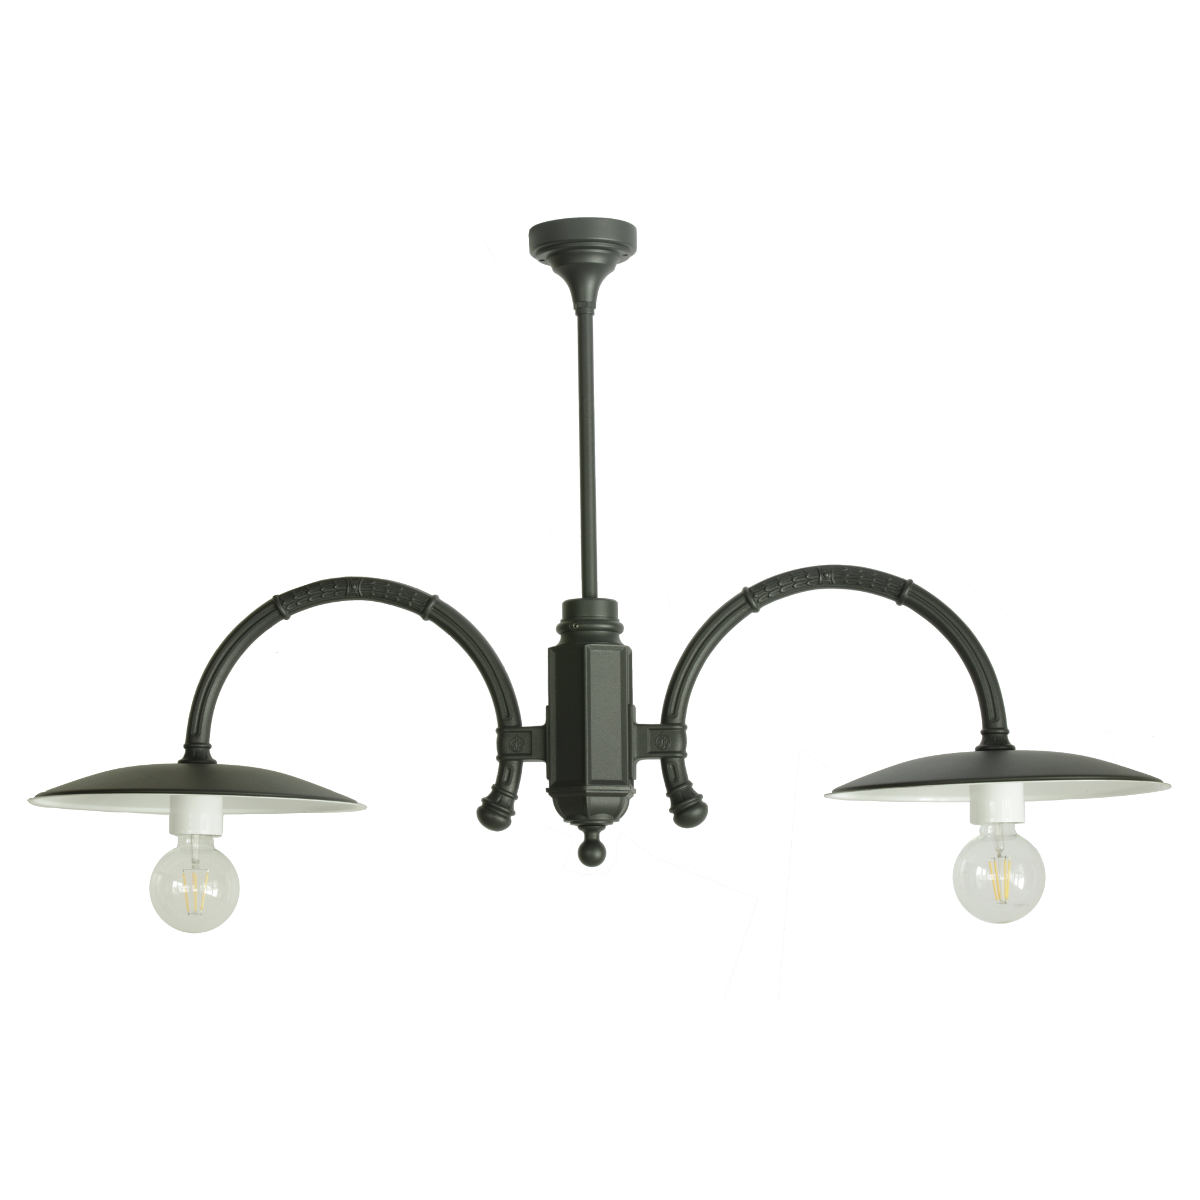 Double-flame Historic Ceiling Lamp for Outdoors